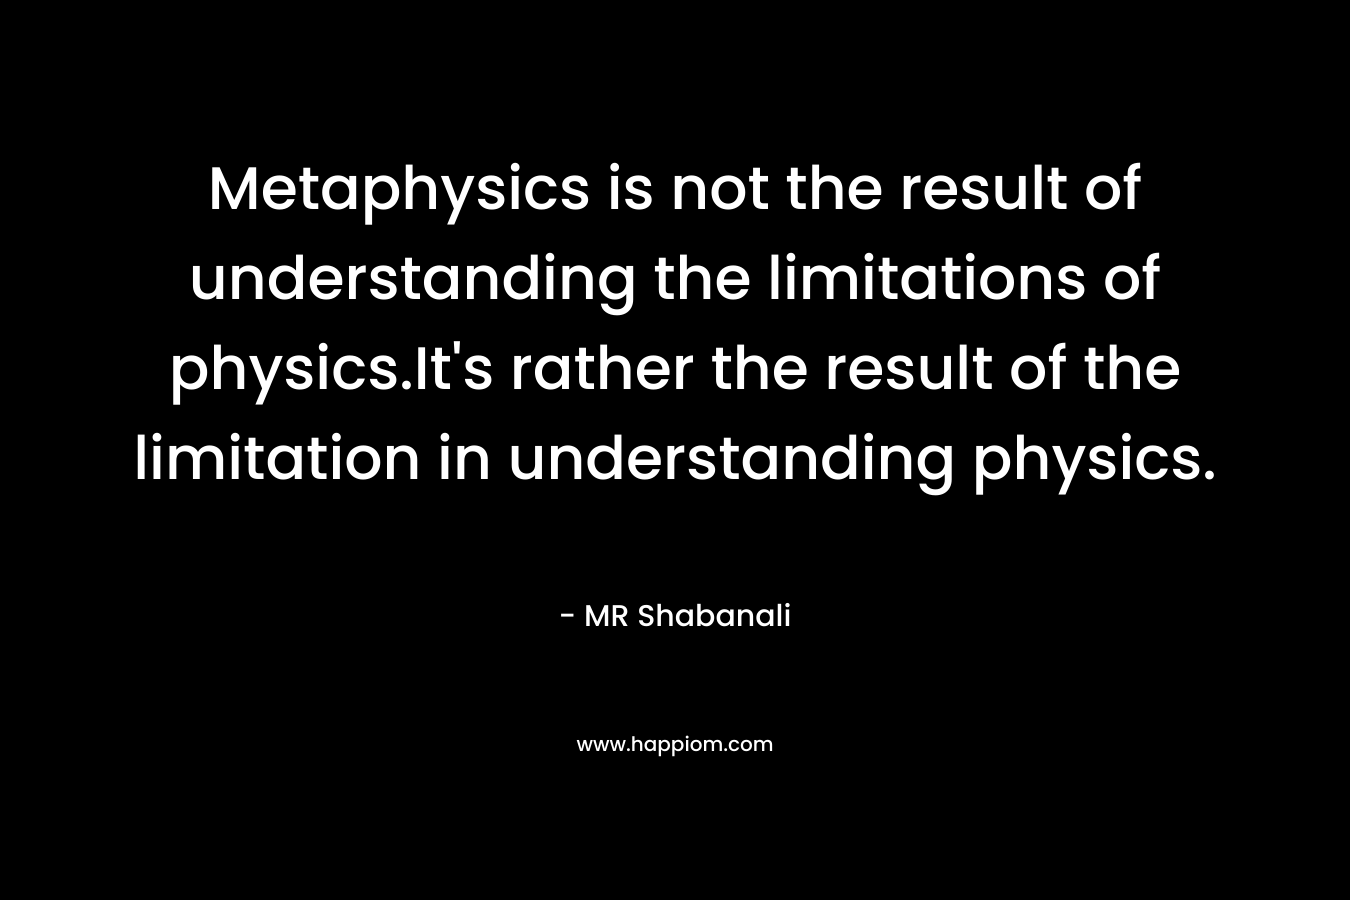 Metaphysics is not the result of understanding the limitations of physics.It's rather the result of the limitation in understanding physics.